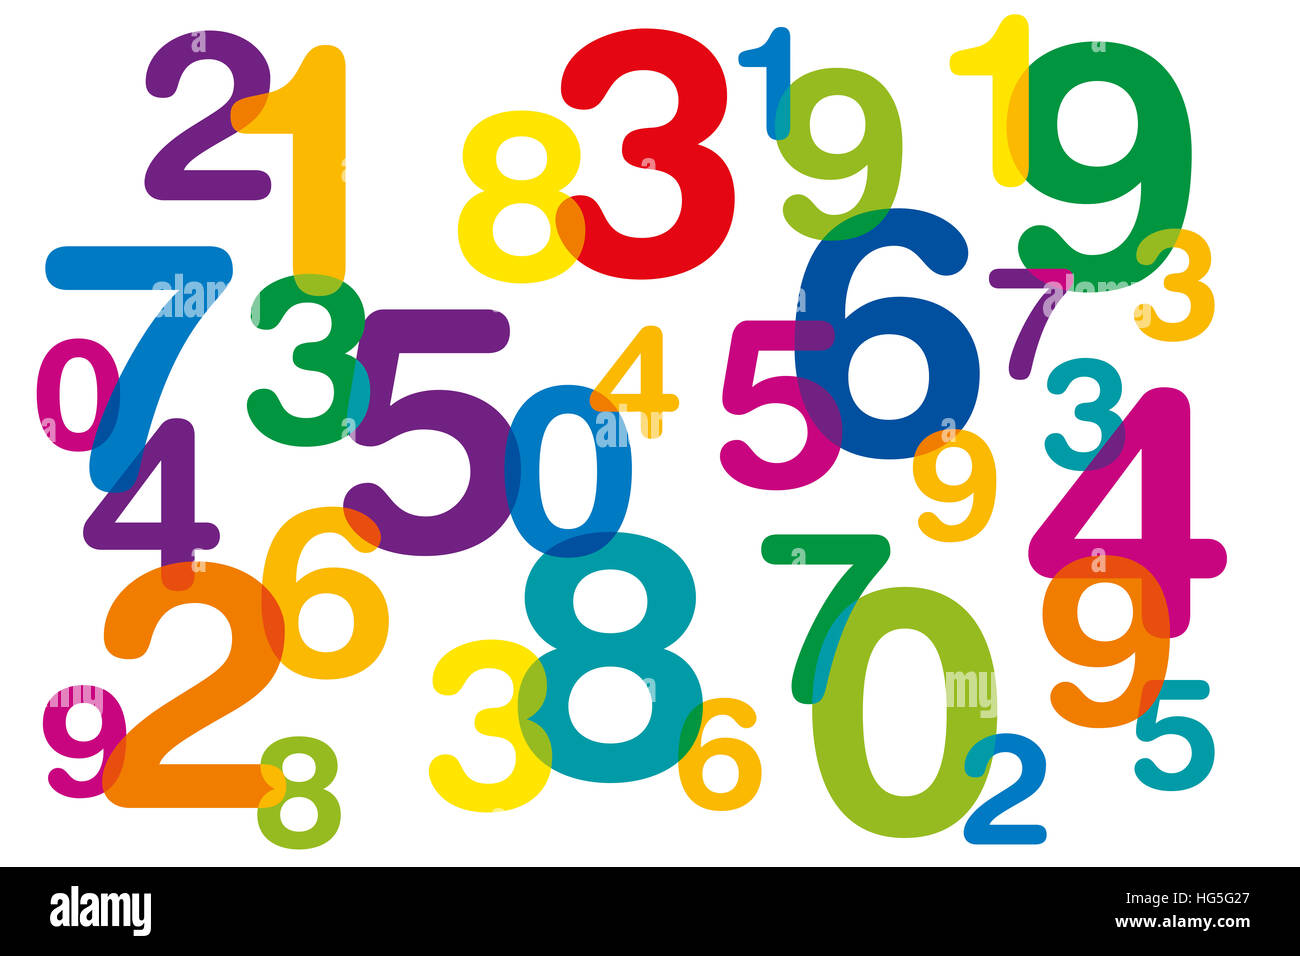 Floating and overlapping colored numbers as symbol for numerology or flood of data. Ten numbers from one to zero. Stock Photo